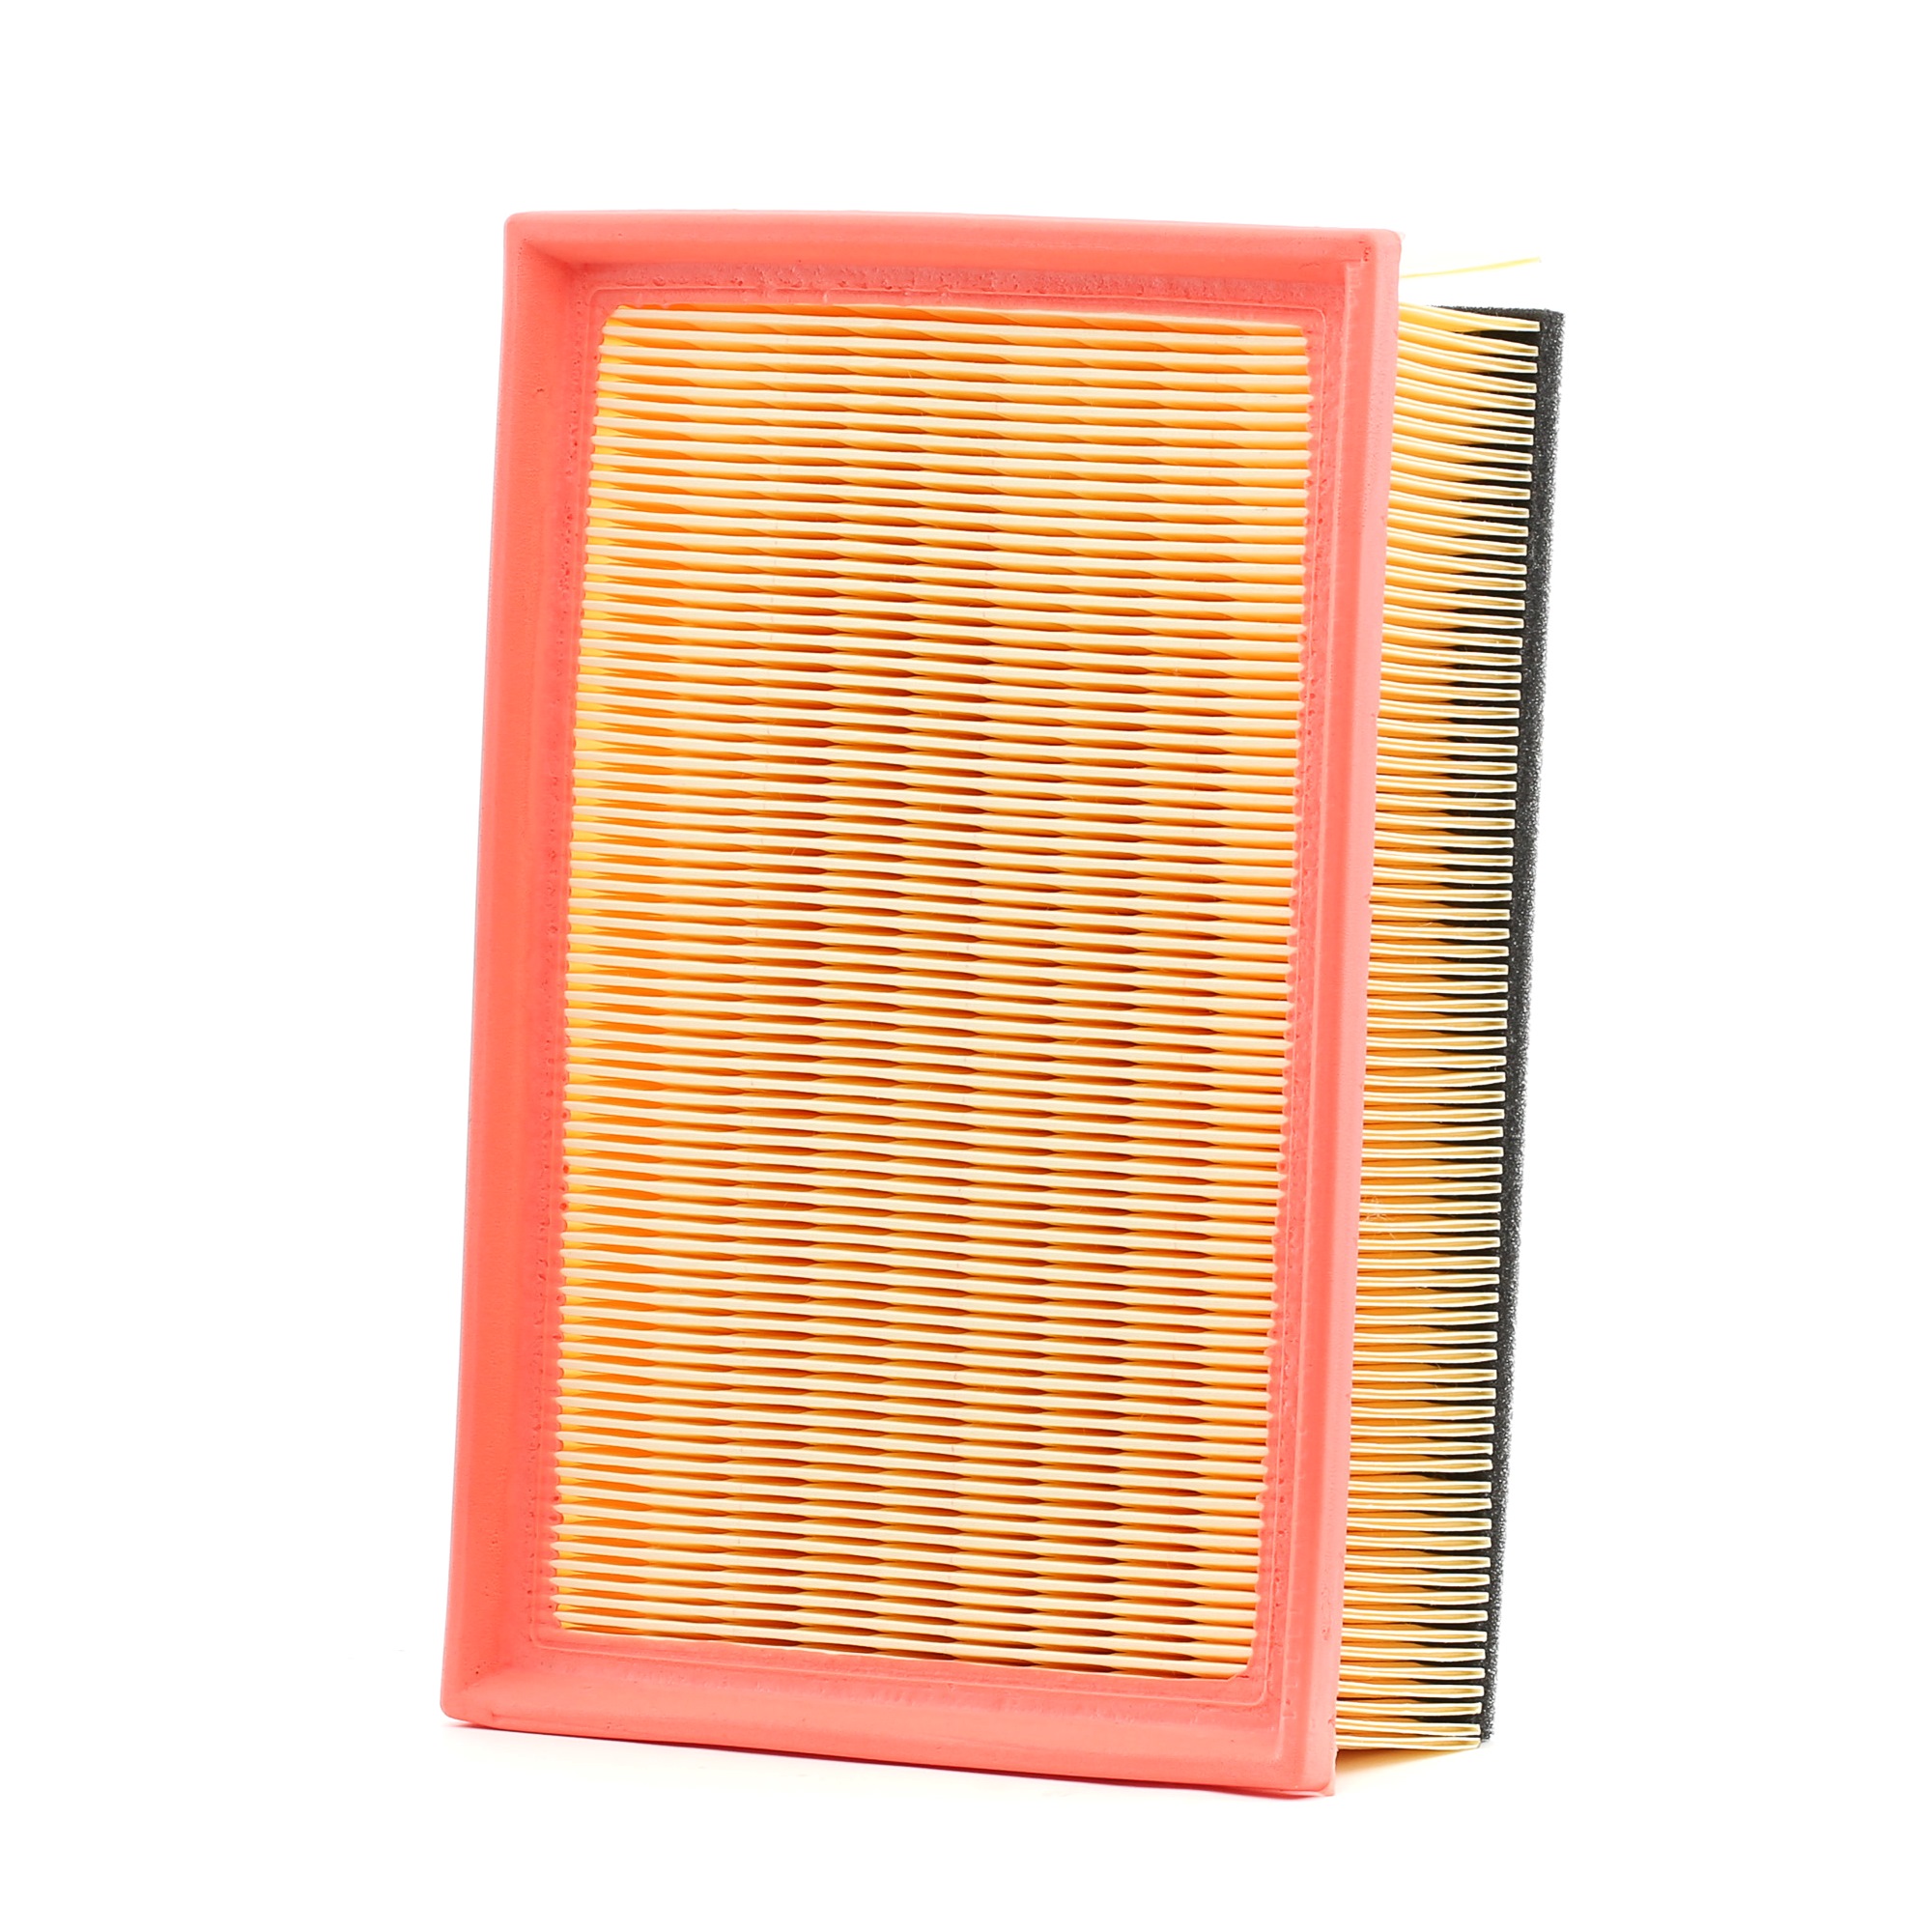 RIDEX 84mm, 168mm, 246, 168,0mm, Filter Insert, Air Recirculation Filter, with pre-filter Length: 246, 168,0mm, Width: 168mm, Height: 84mm Engine air filter 8A1646 buy